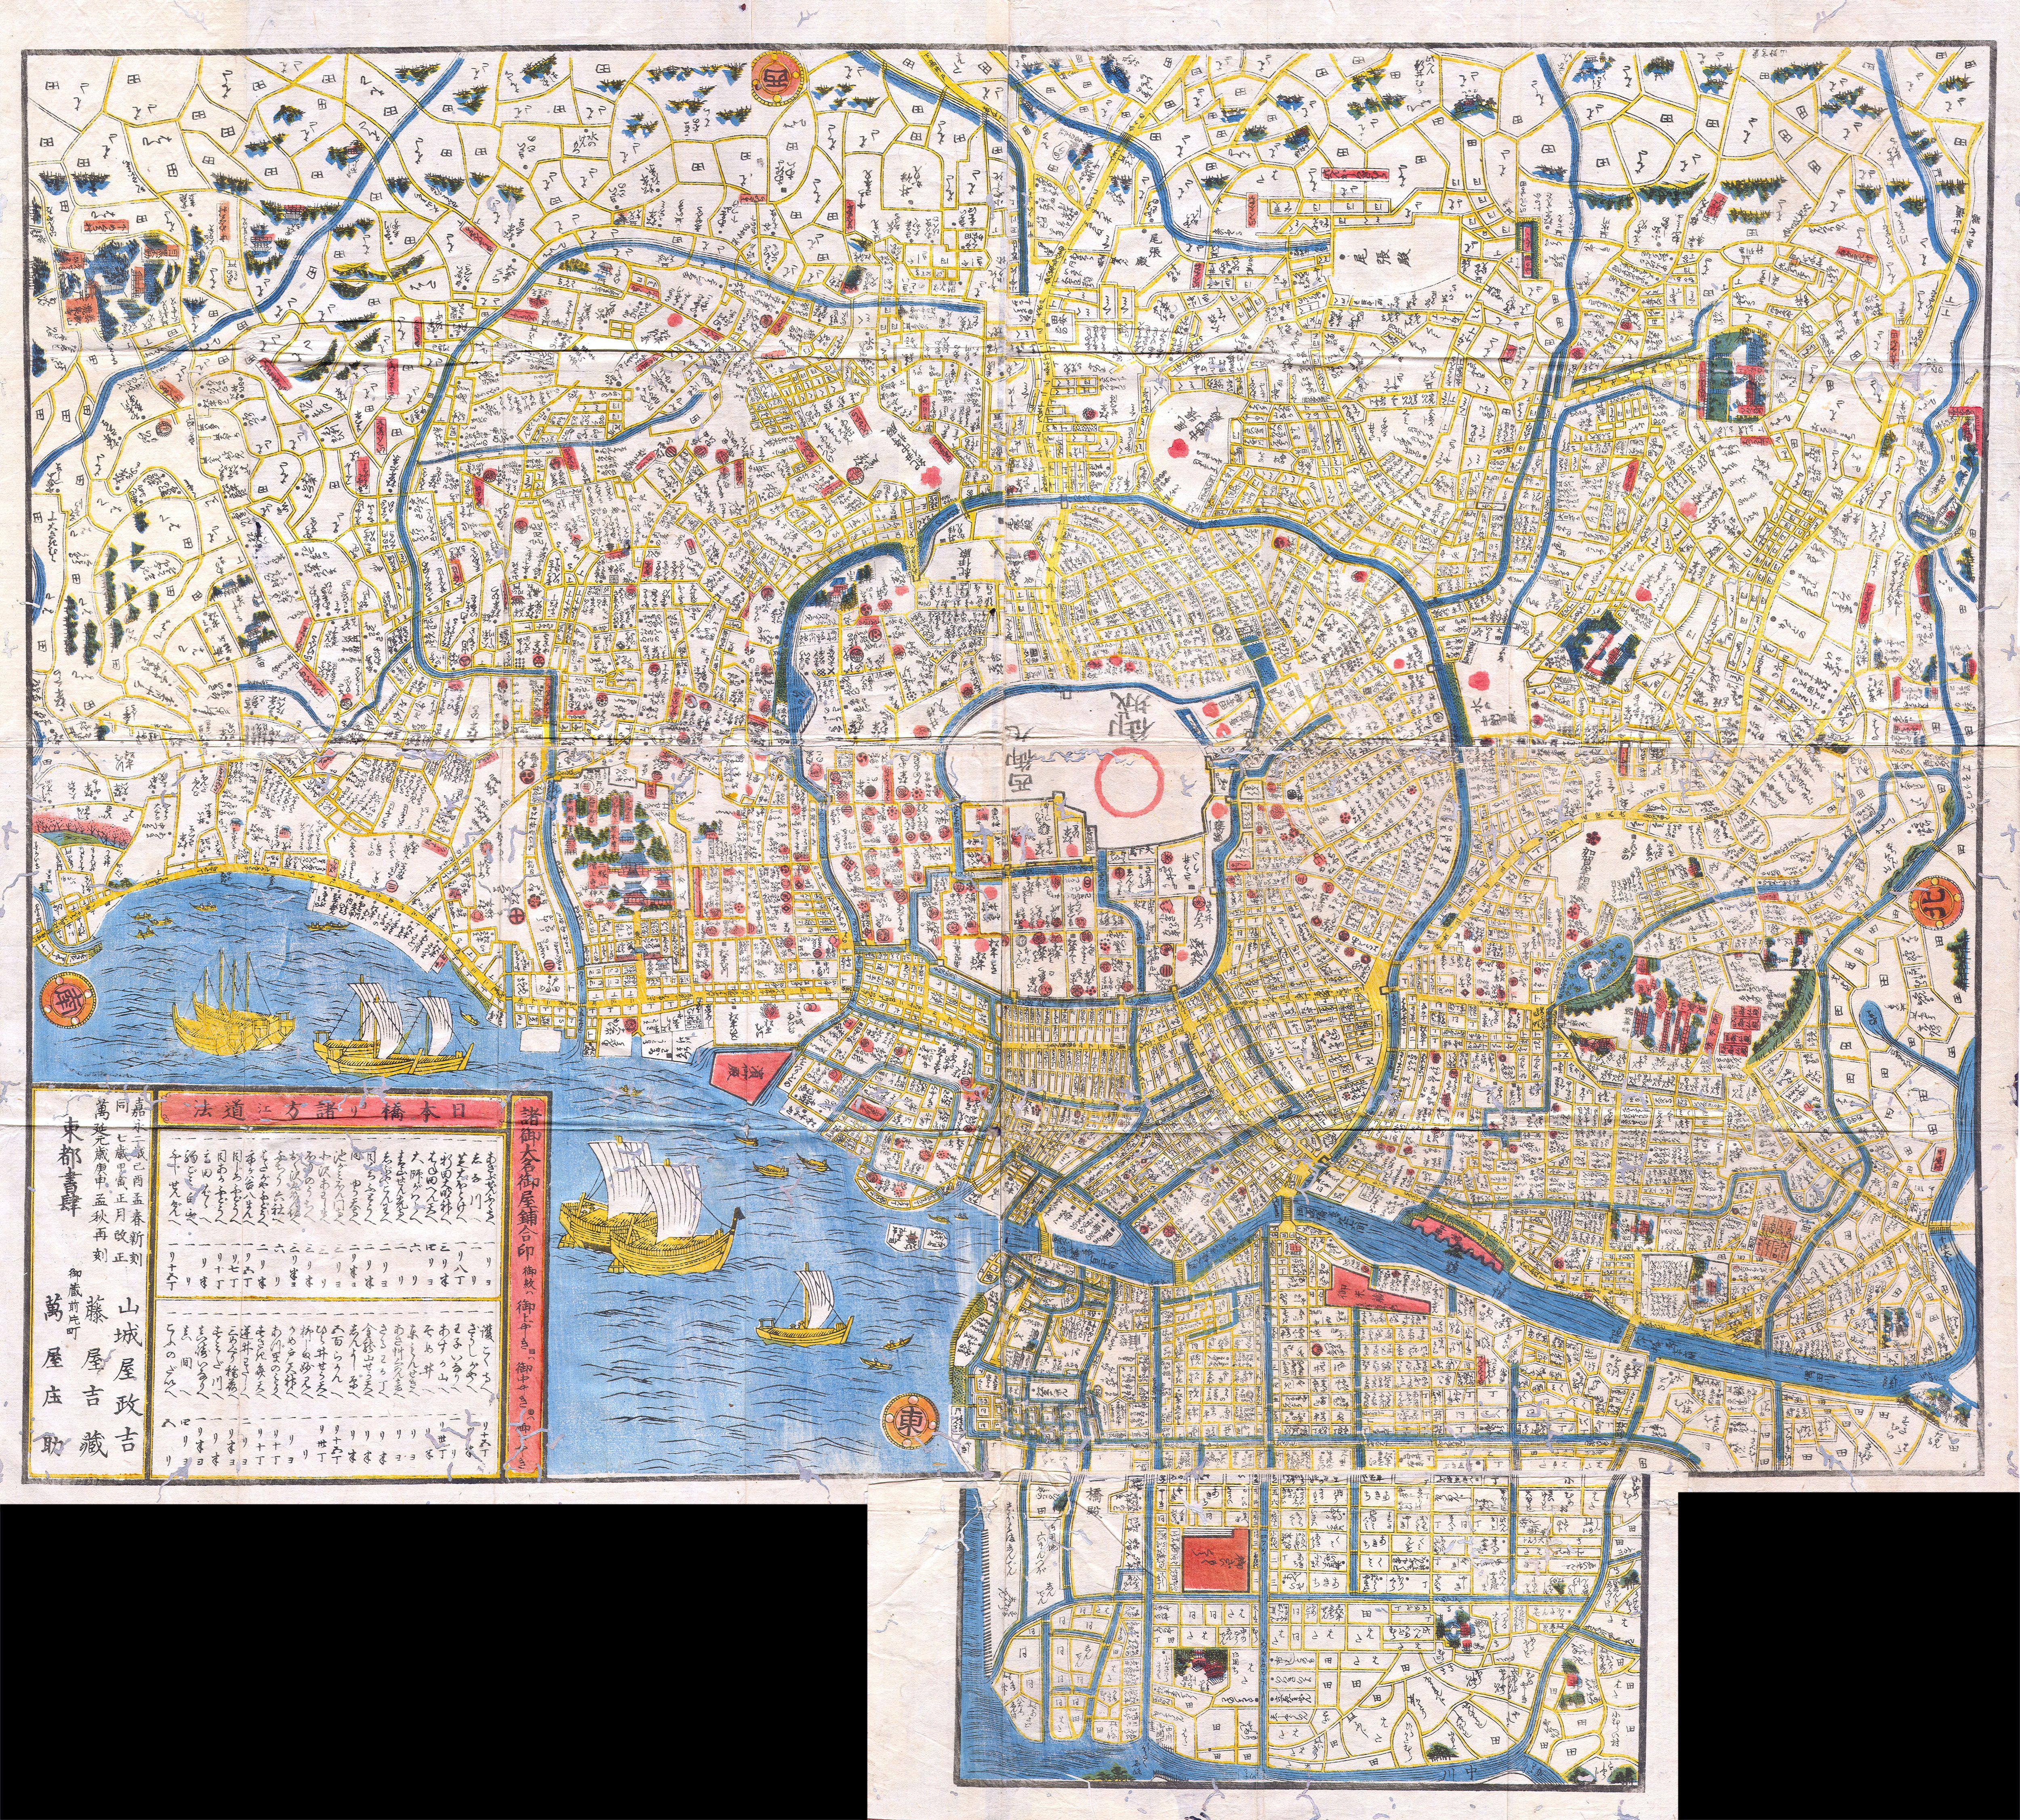 1849 Edo Period Japanese Woodcut Map of Edo or Tokyo Japan_by_ Geographicus Rare Antique Maps.jpg